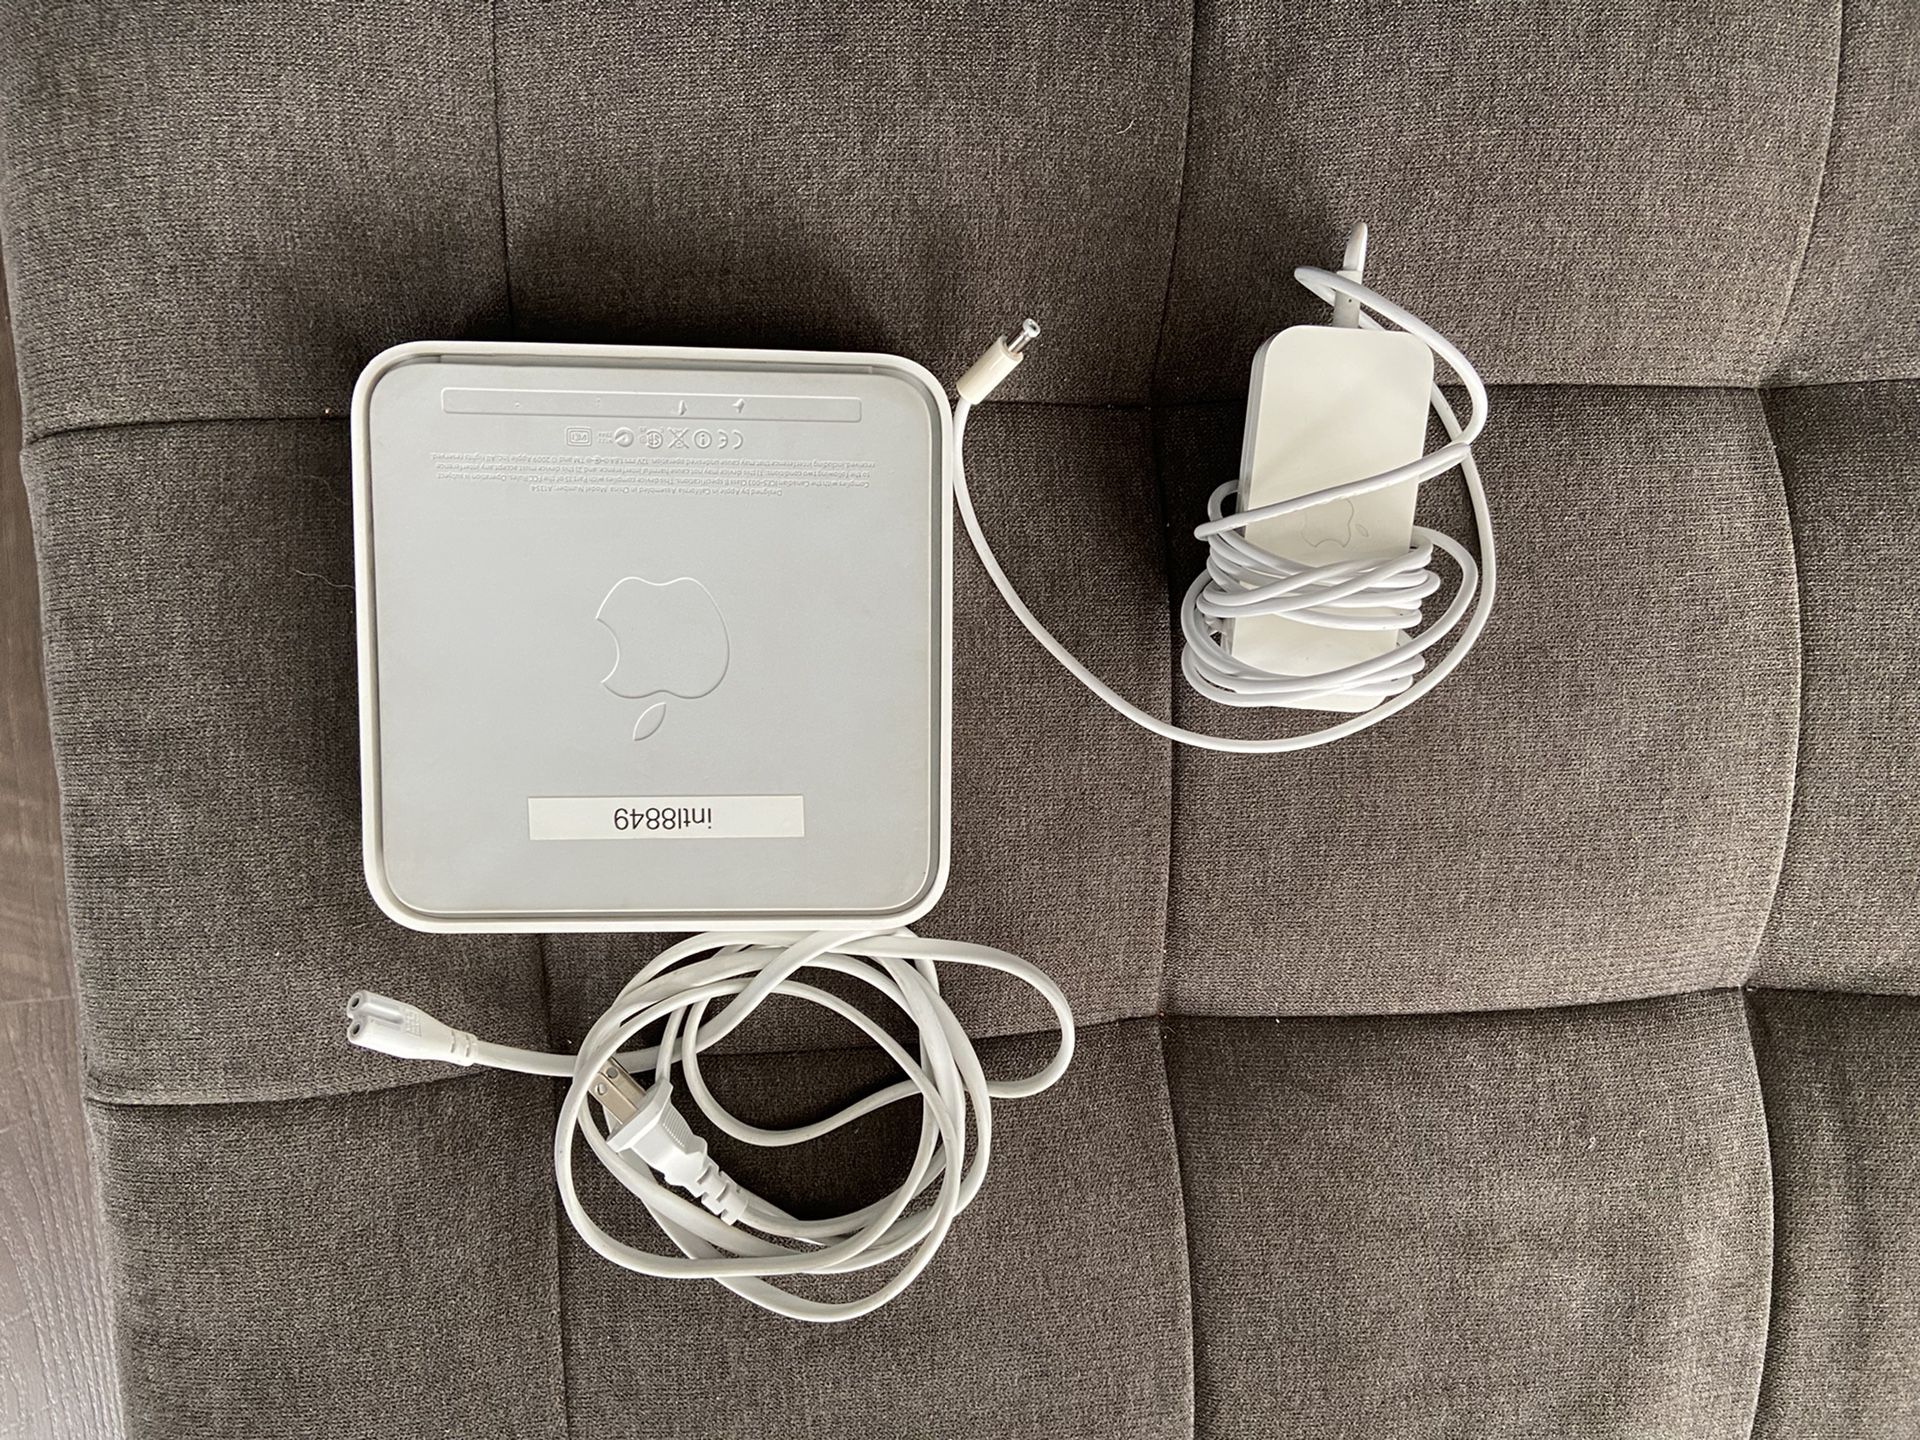 Apple AirPort Extreme Dual-Band Base Station Router (Model A1354)